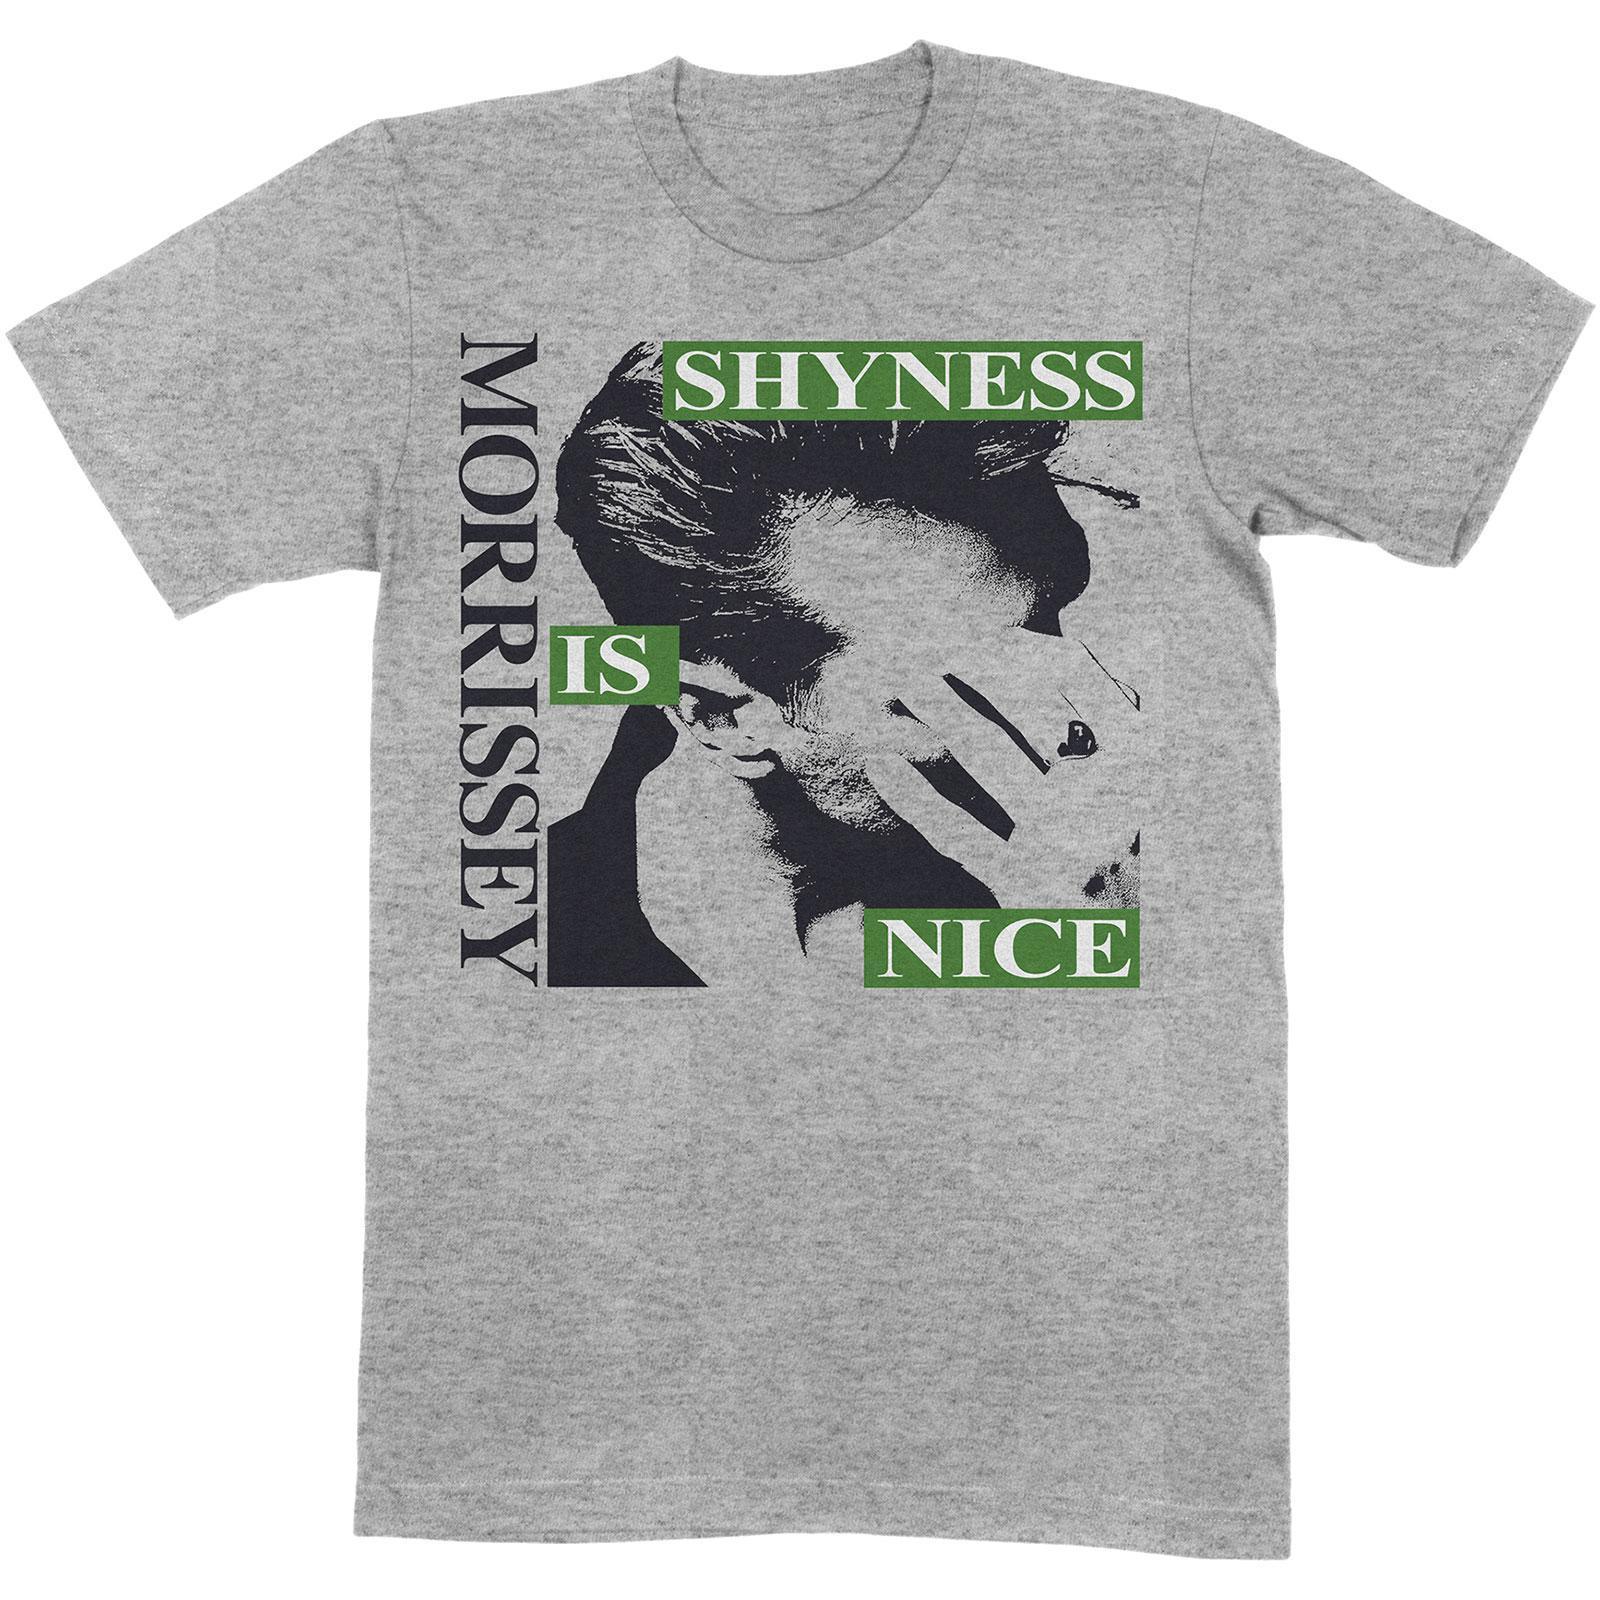 Morrissey Unisex Adult Shyness Is Nice Cotton T-Shirt (Grey) (L)